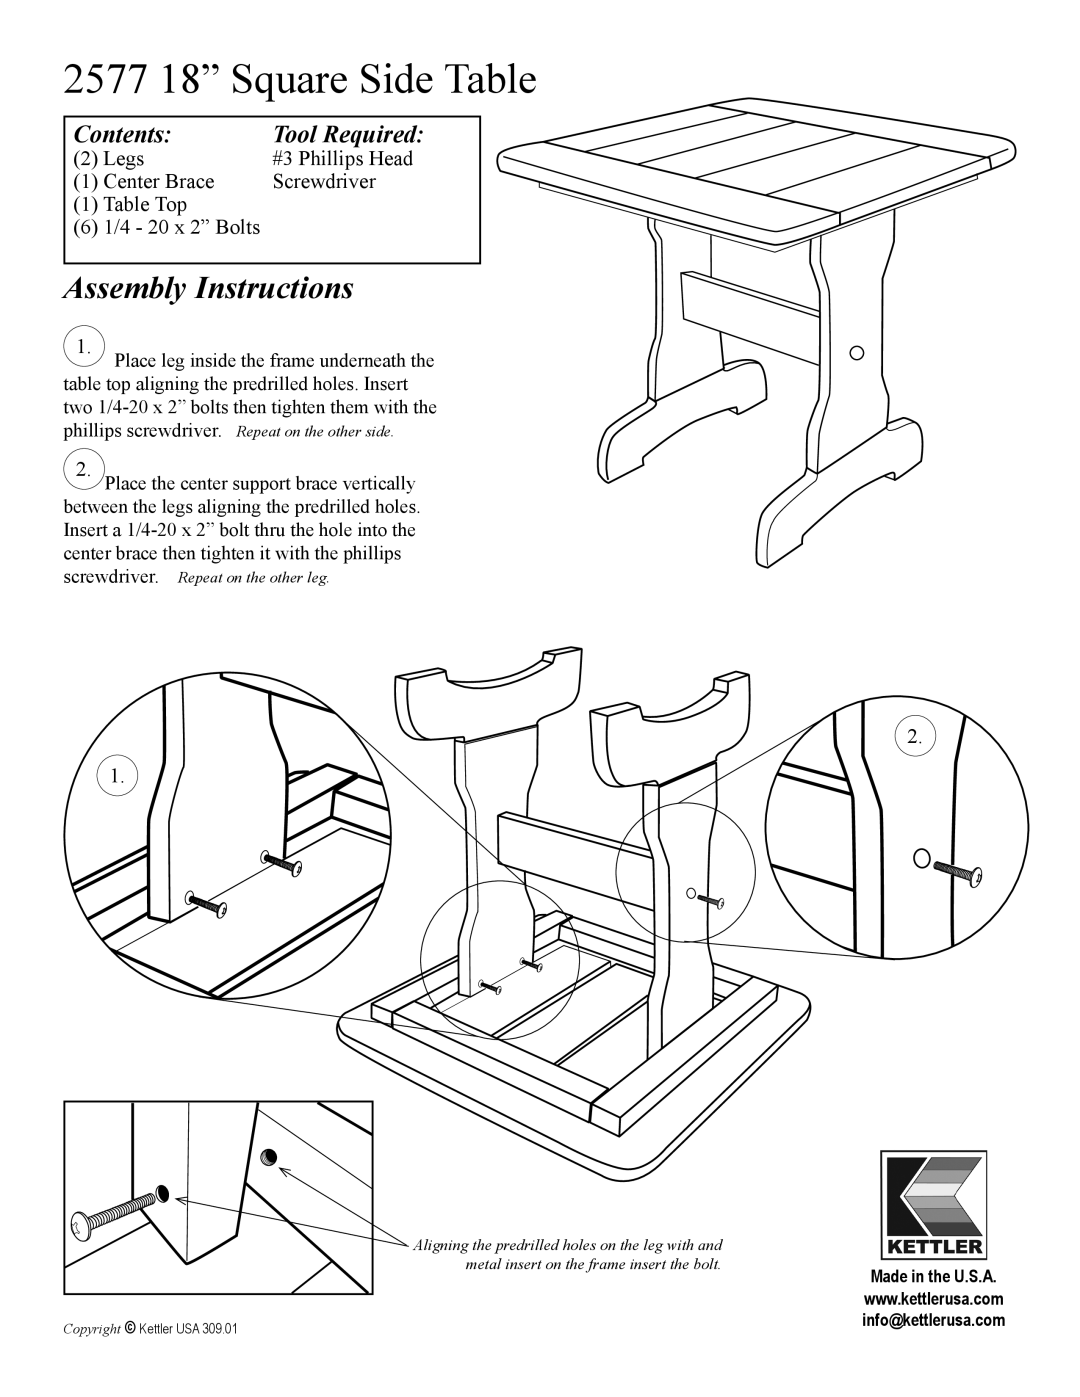 Kettler manual 2577 18” Square Side Table, Assembly Instructions, Contents, Tool Required 